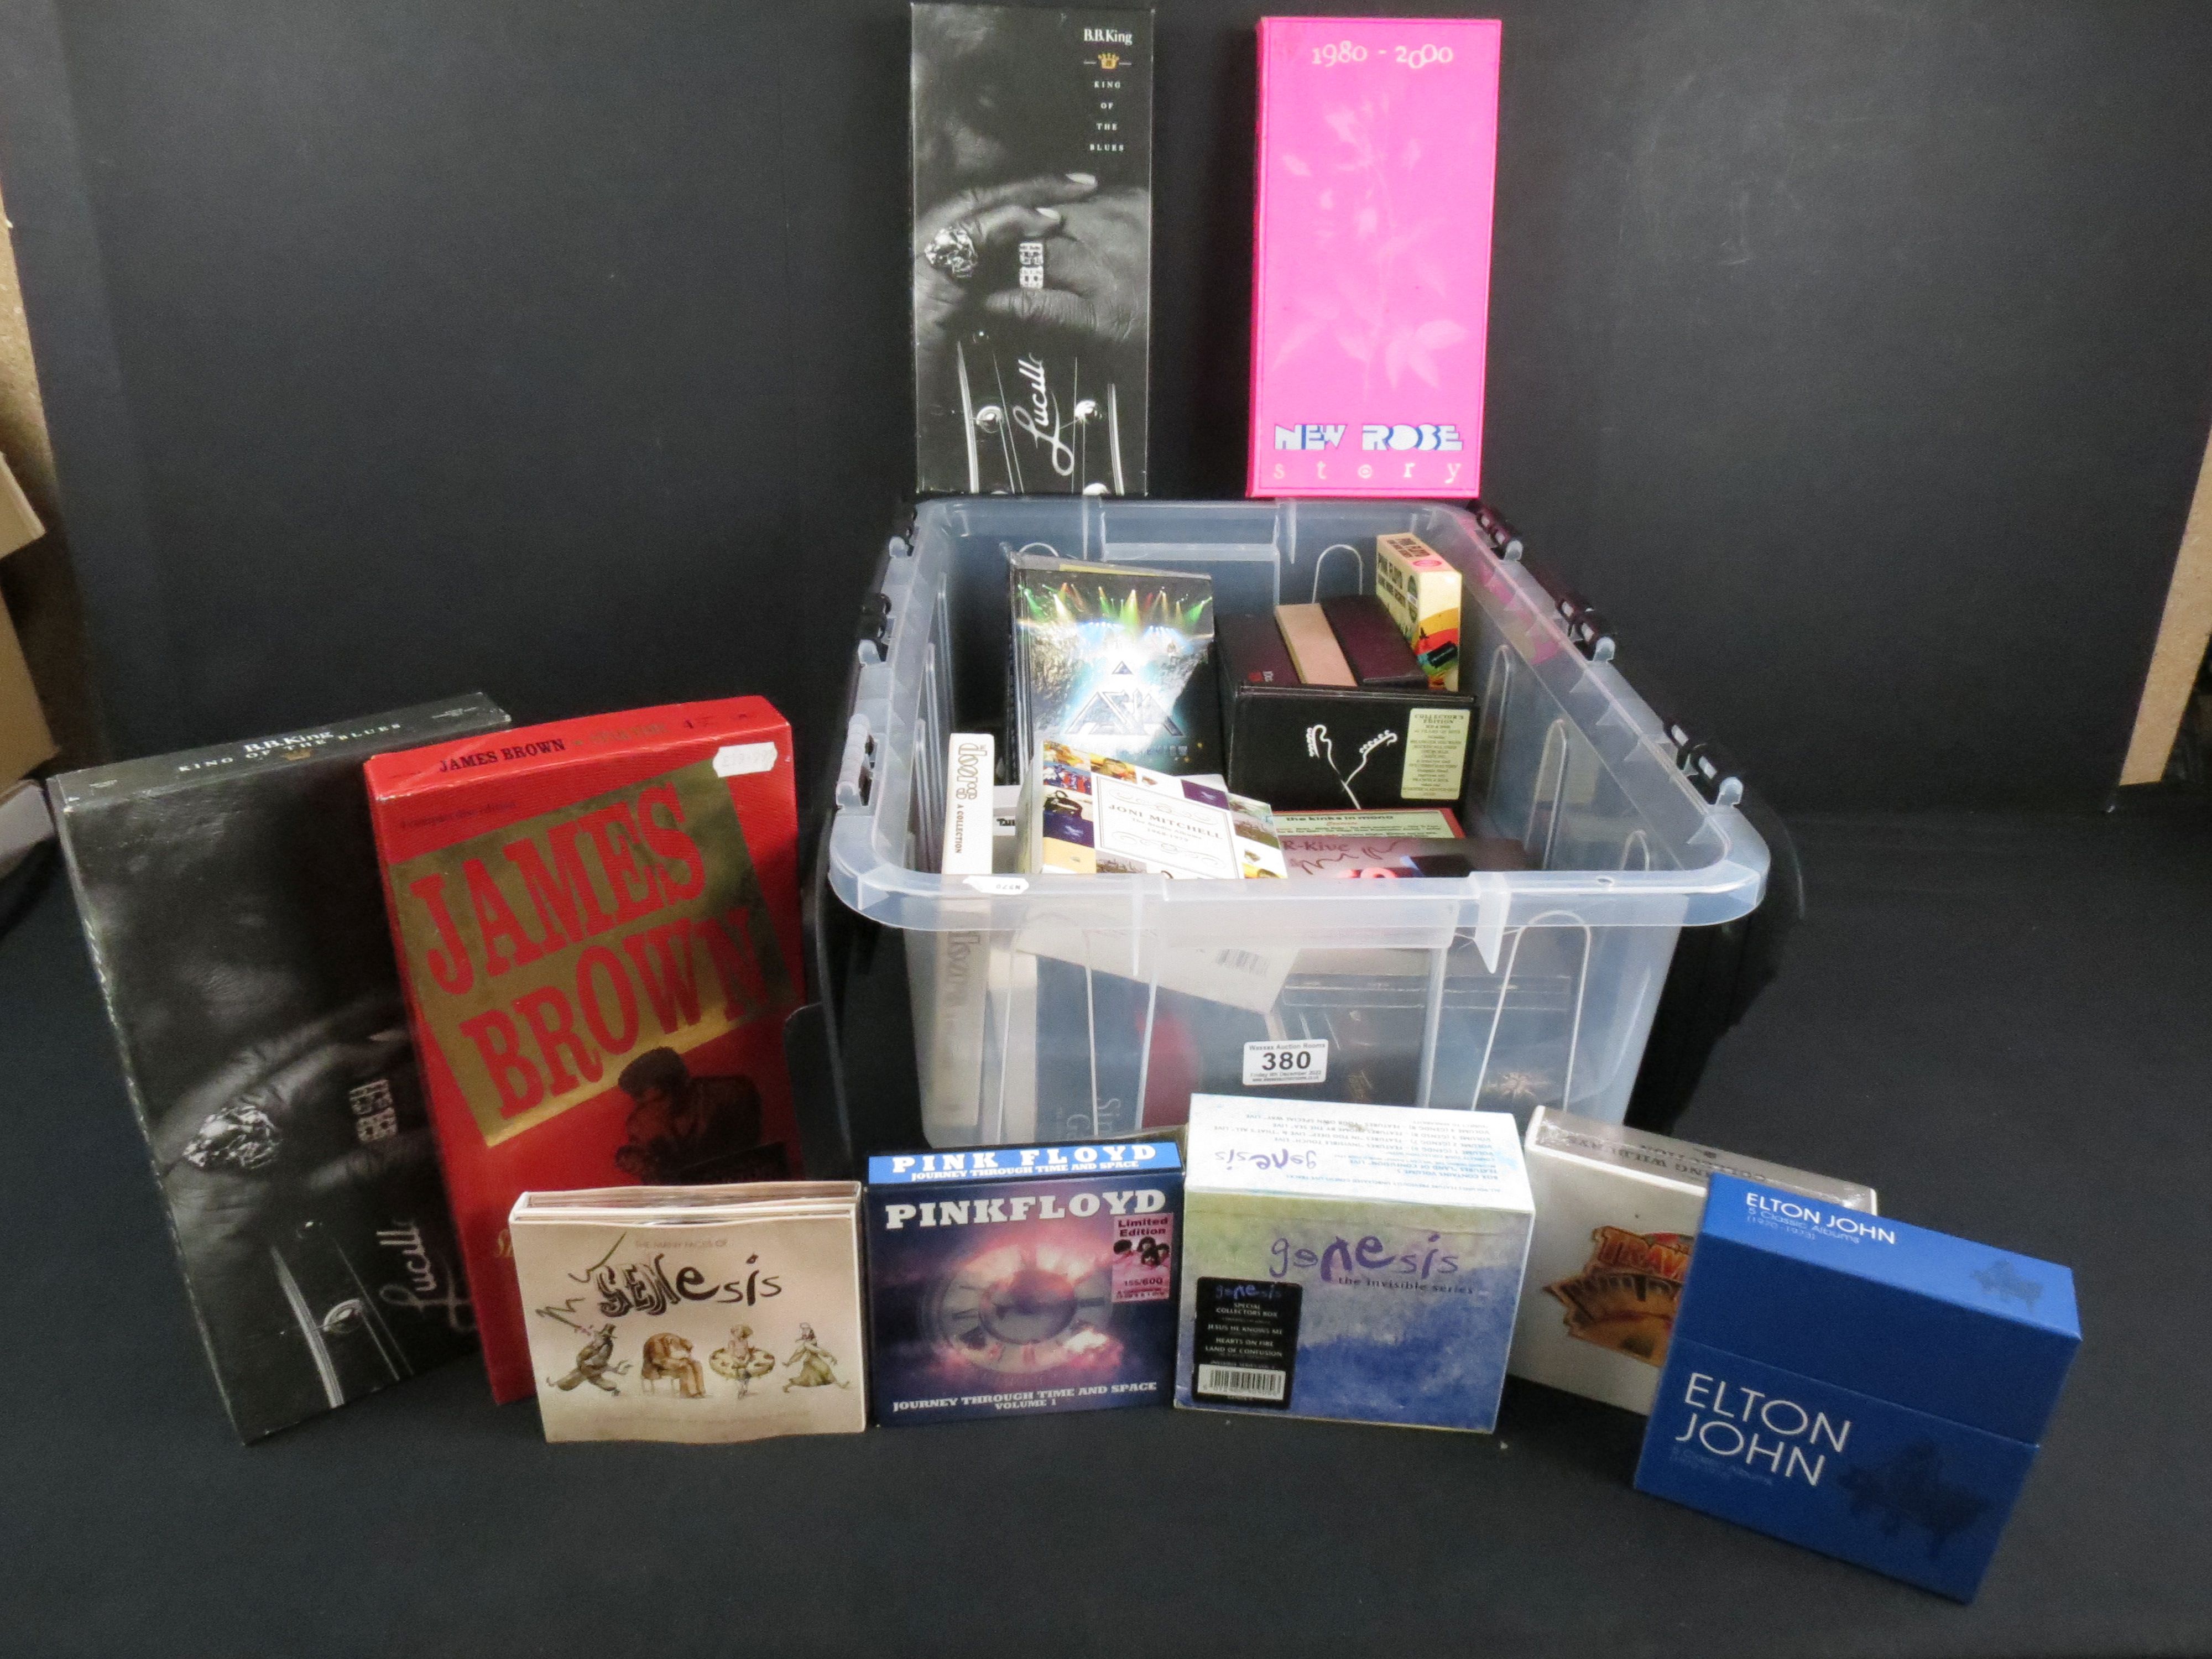 CDs / DVDs - 33 Box Sets to include The Doors, Elton John, James Brown, Genesis, Pink Floyd, The